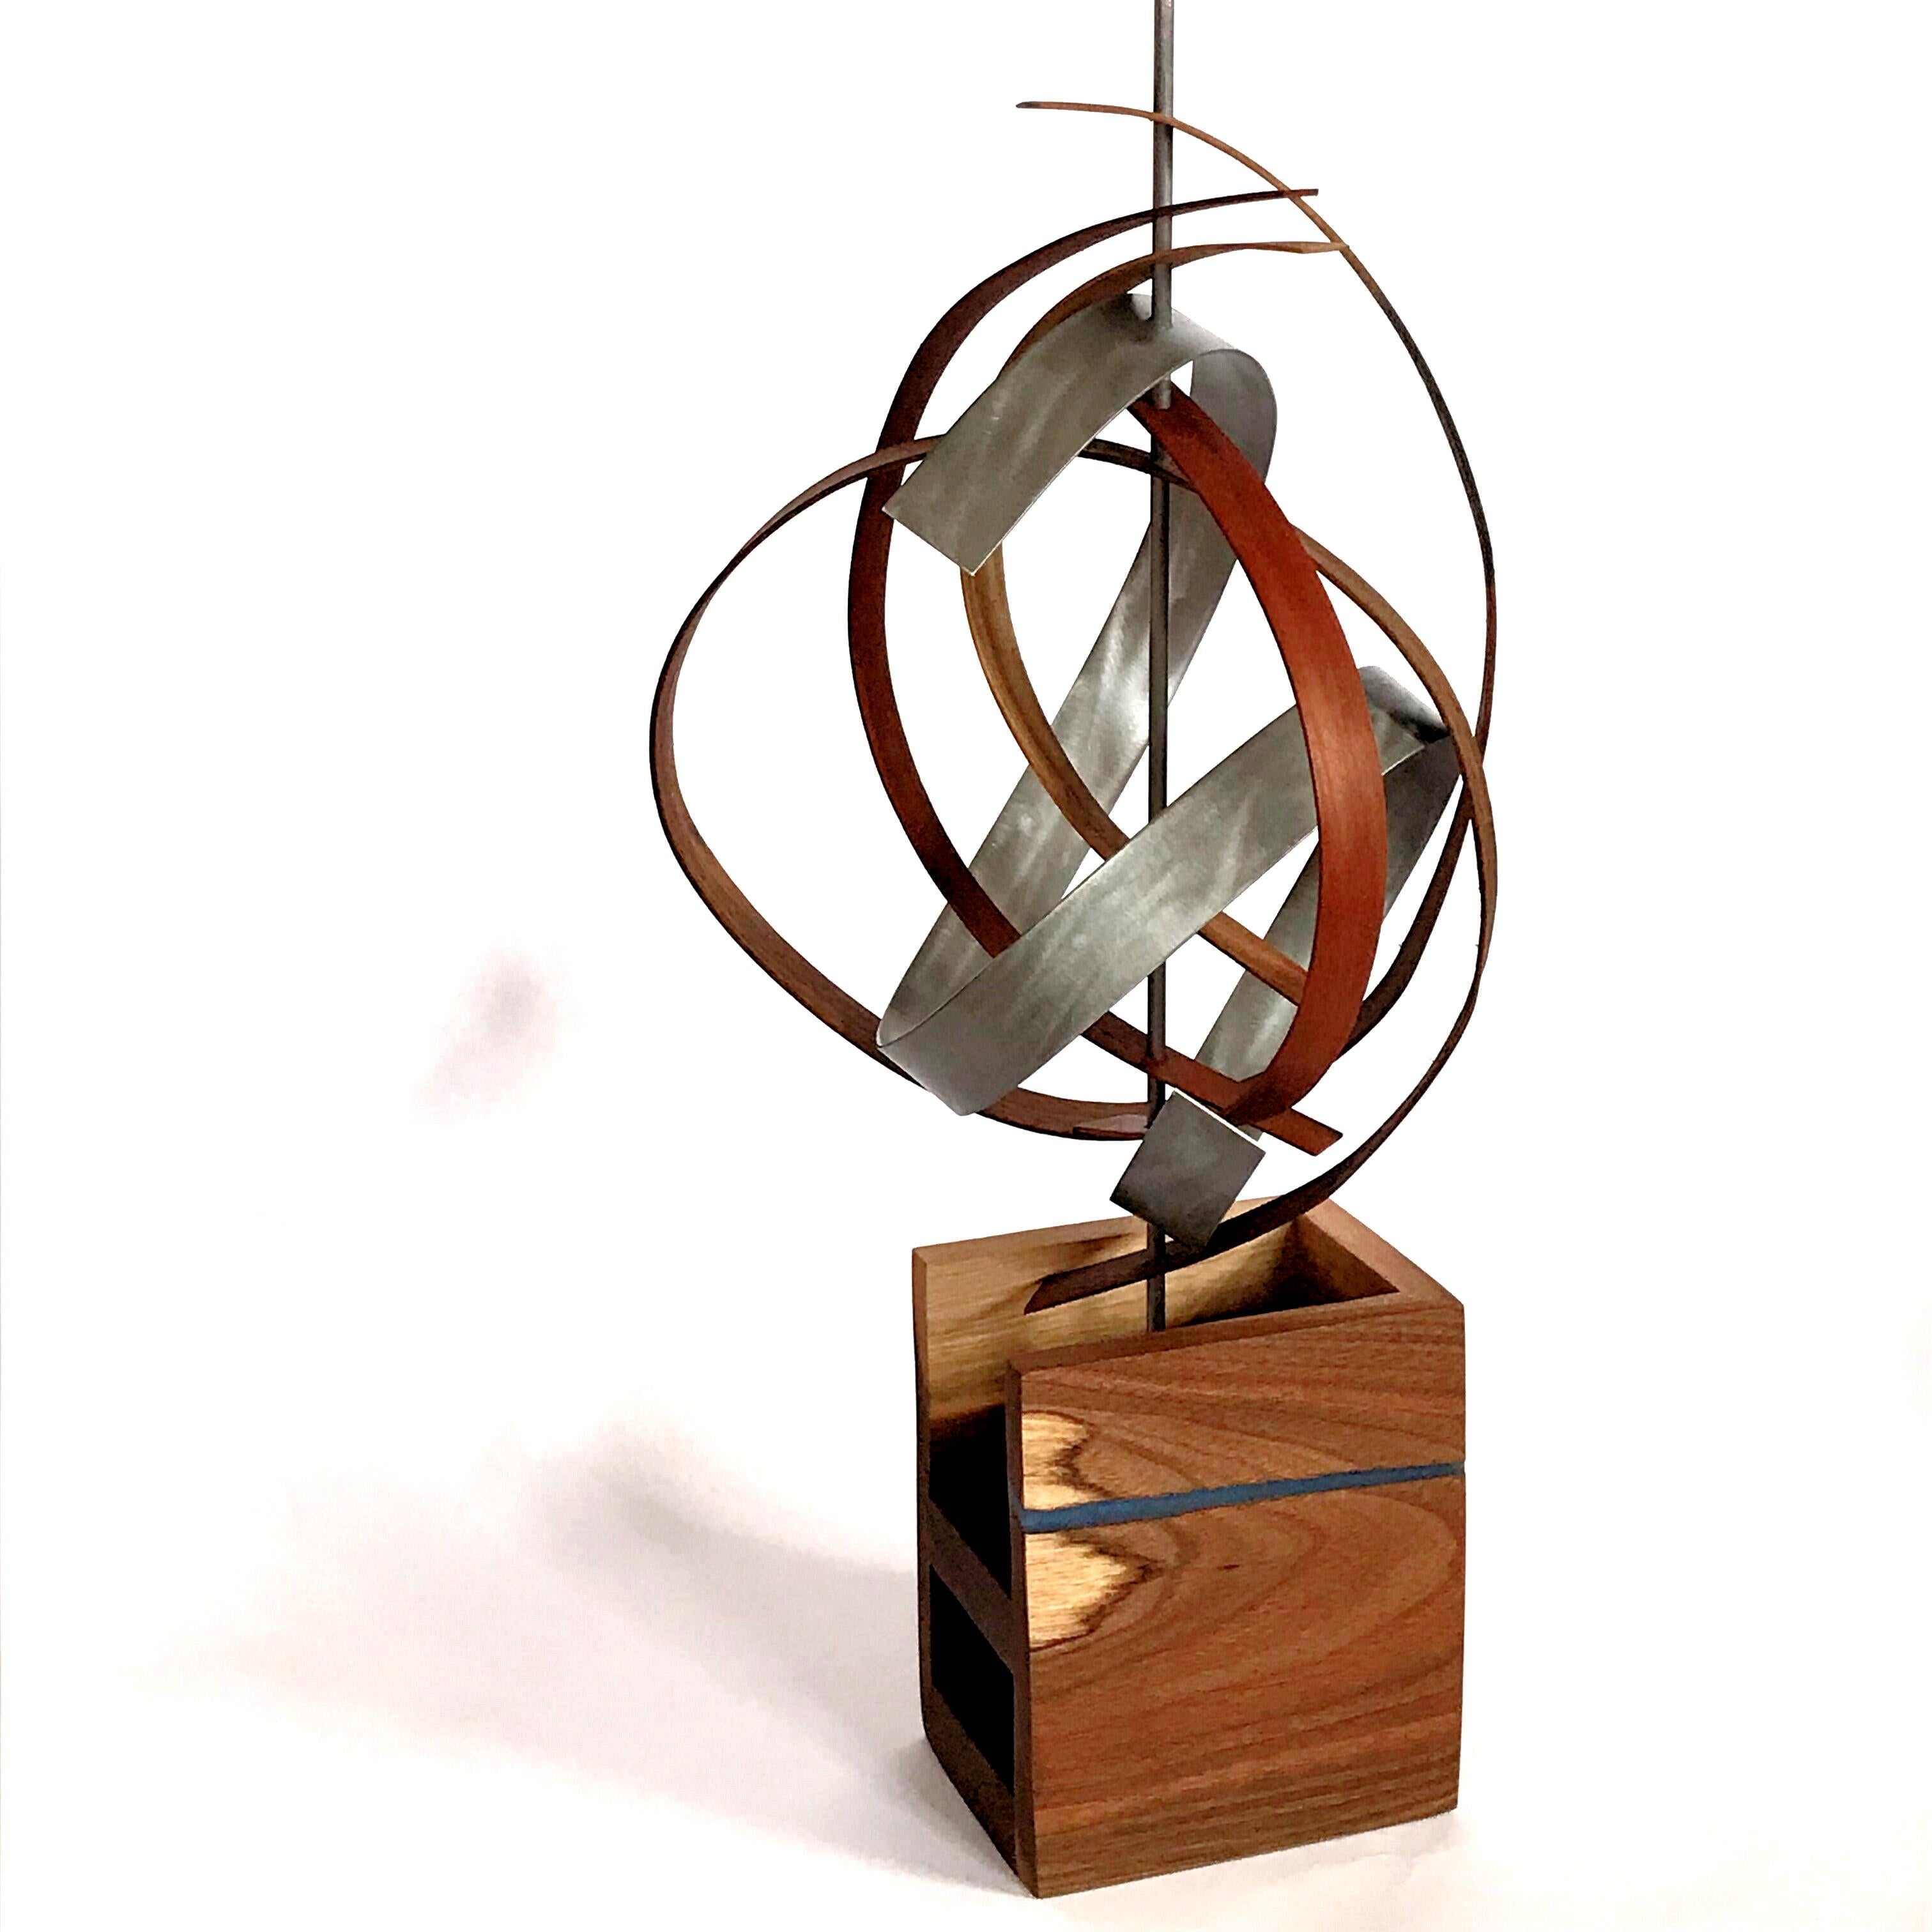 Title: G-Ribbon
Description: Aluminum slat with grind pattern and gun-metal finish looped like a ribbon through bent black walnut and cherry slats. Base consists of walnut slab, folded into three sides and accented with a blue epoxy streak.

Jeff